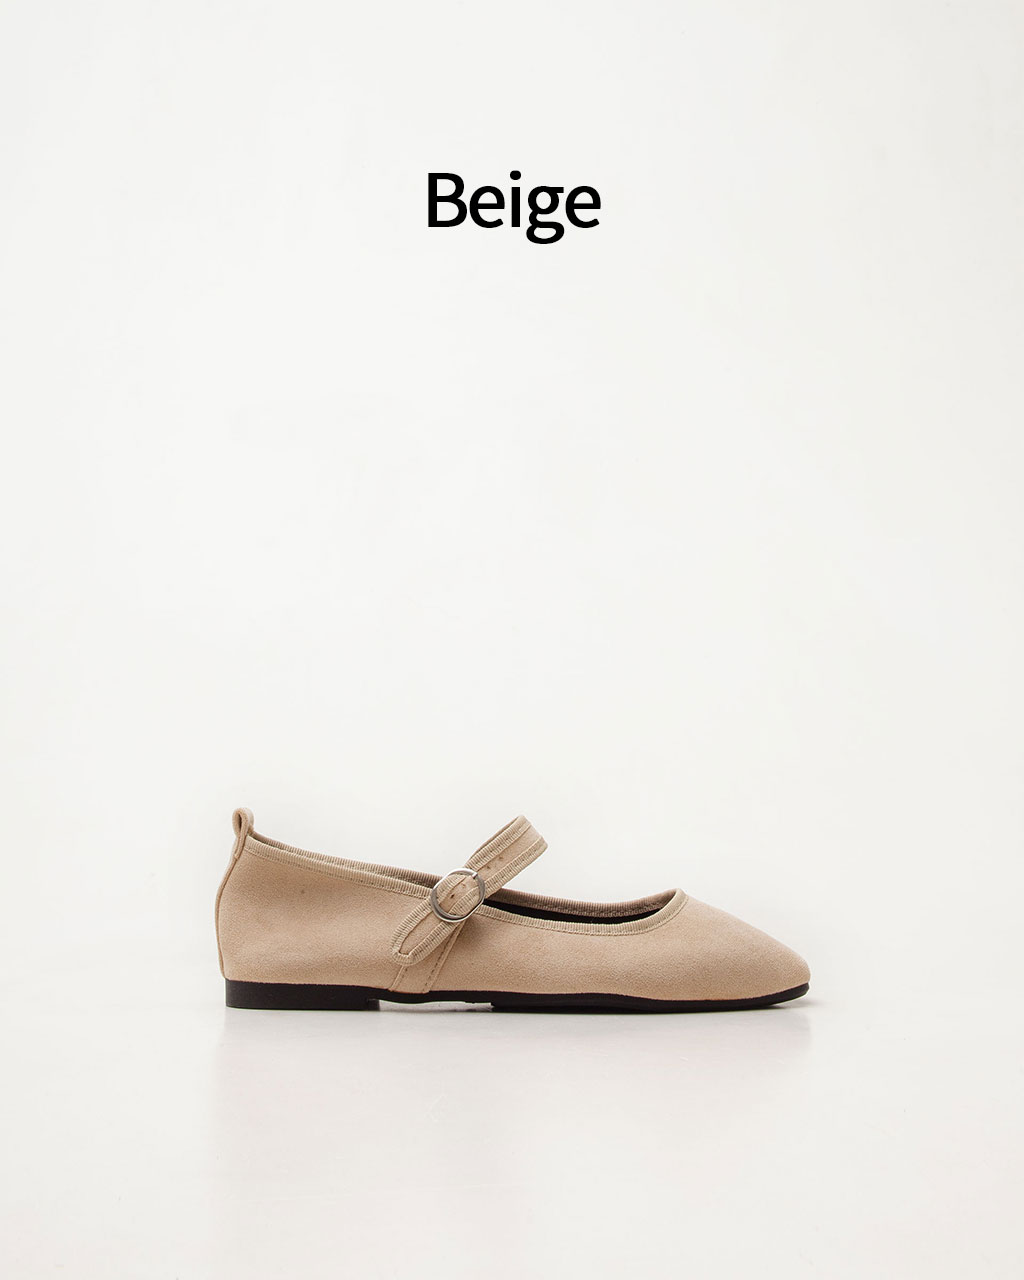 With-70 - Beige()